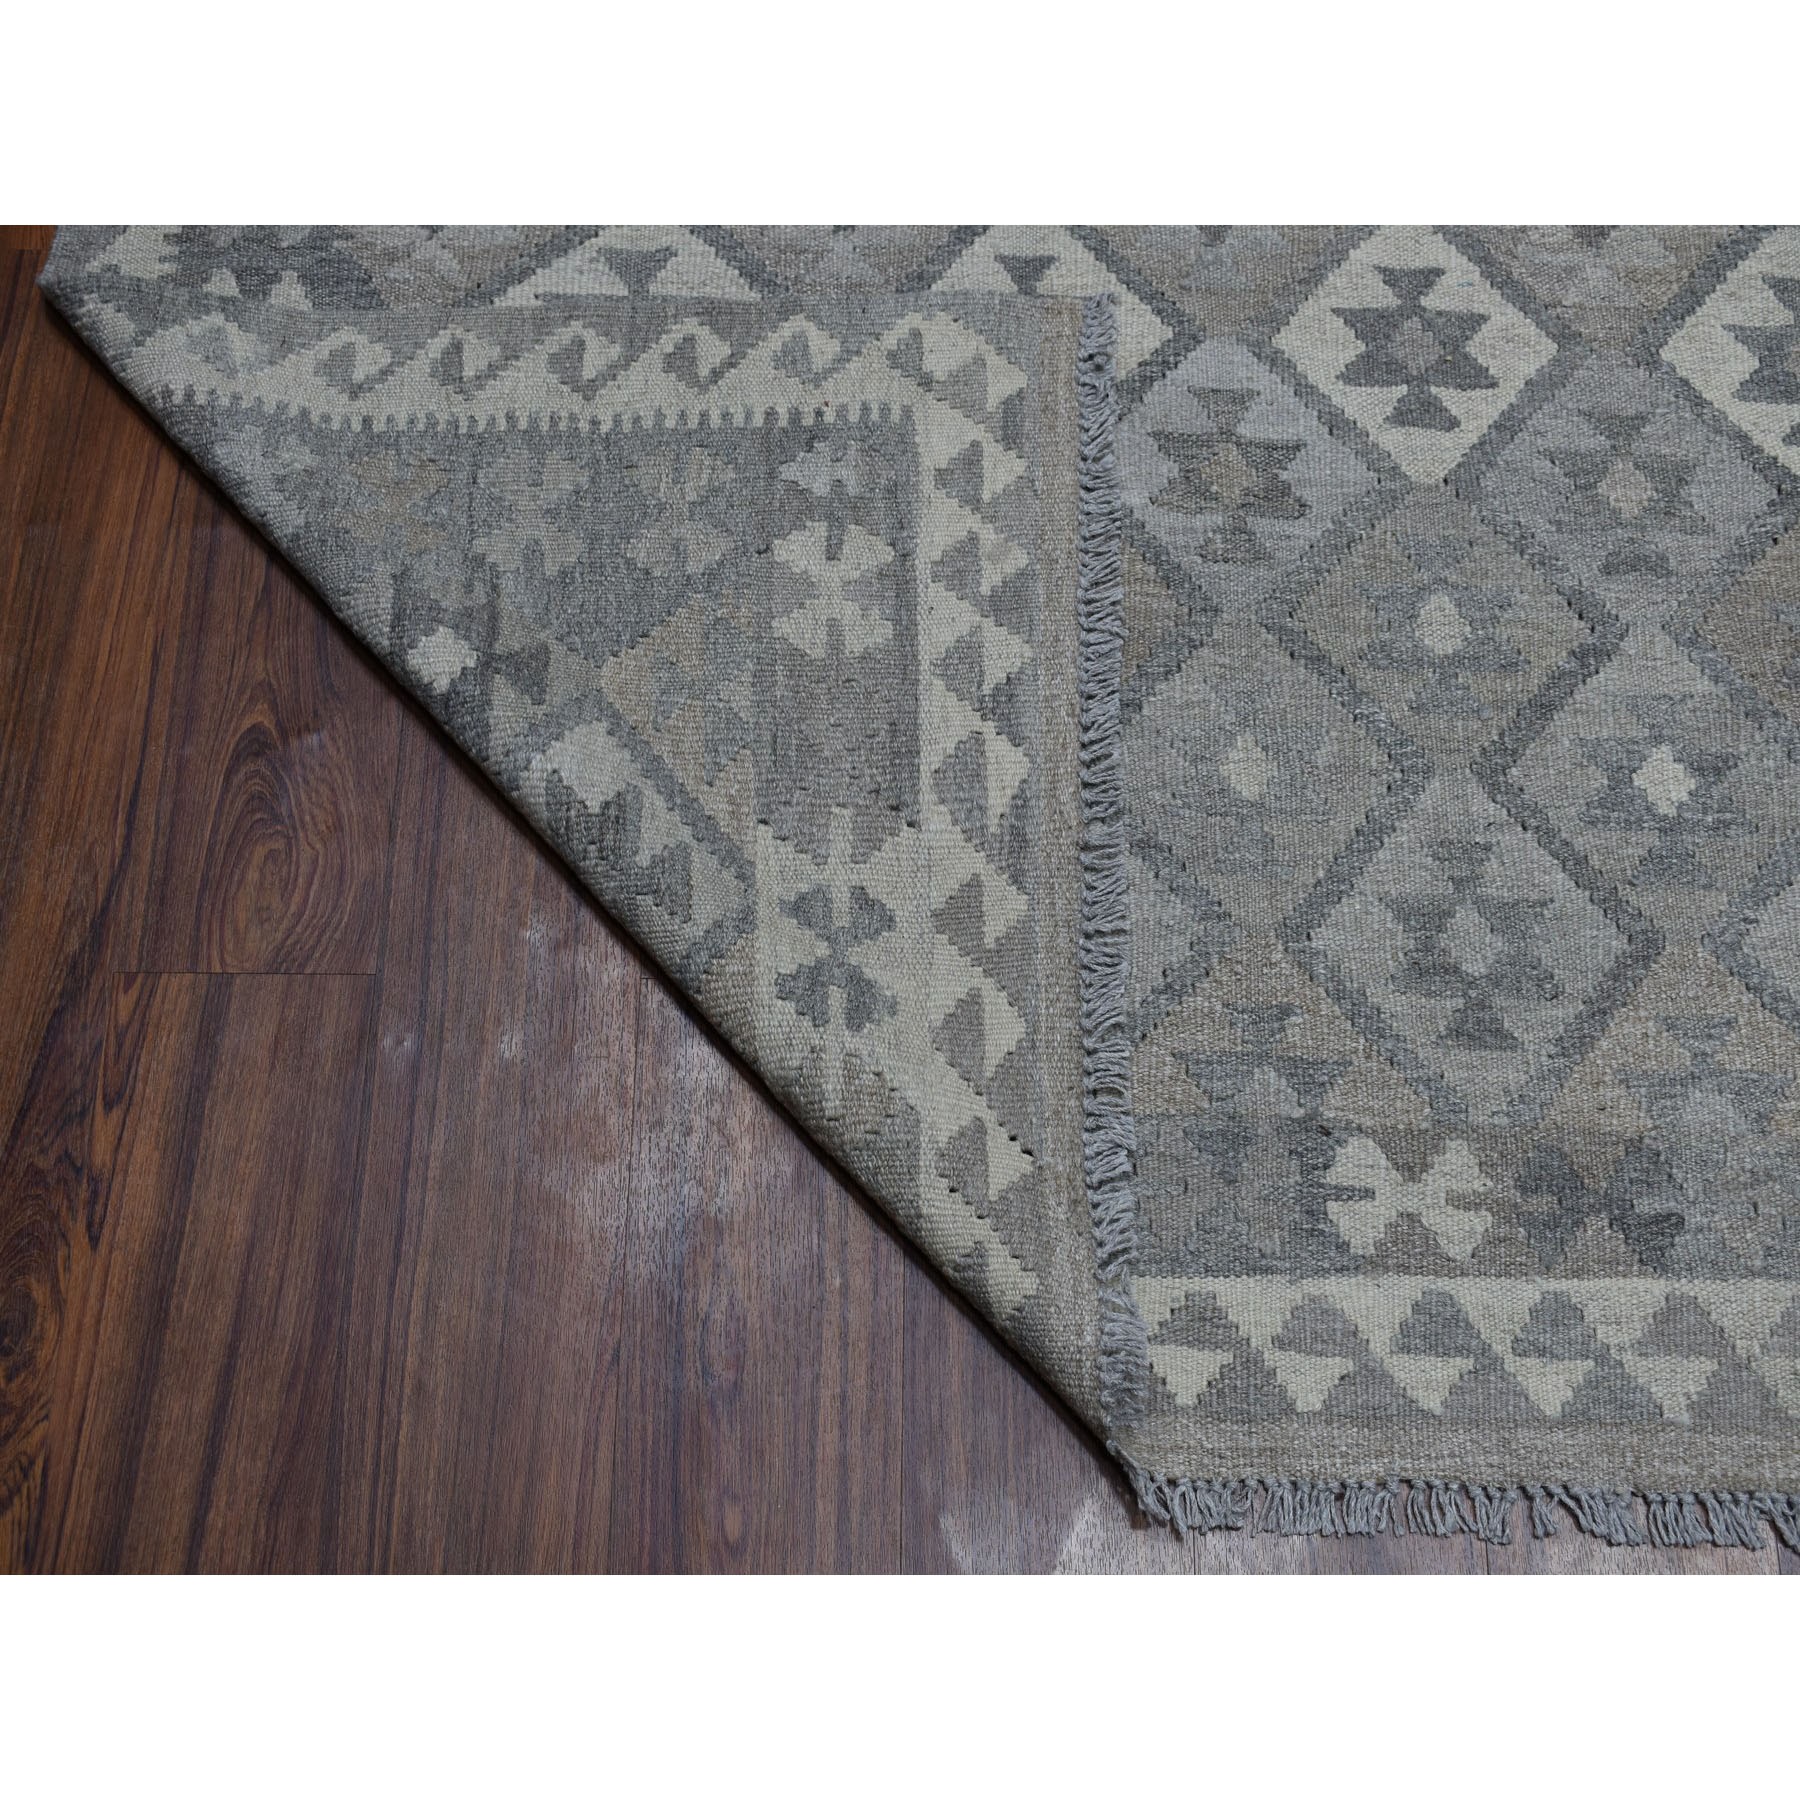 8-1 x9-10  Undyed Natural Wool Afghan Kilim Reversible Hand Woven Oriental Rug 